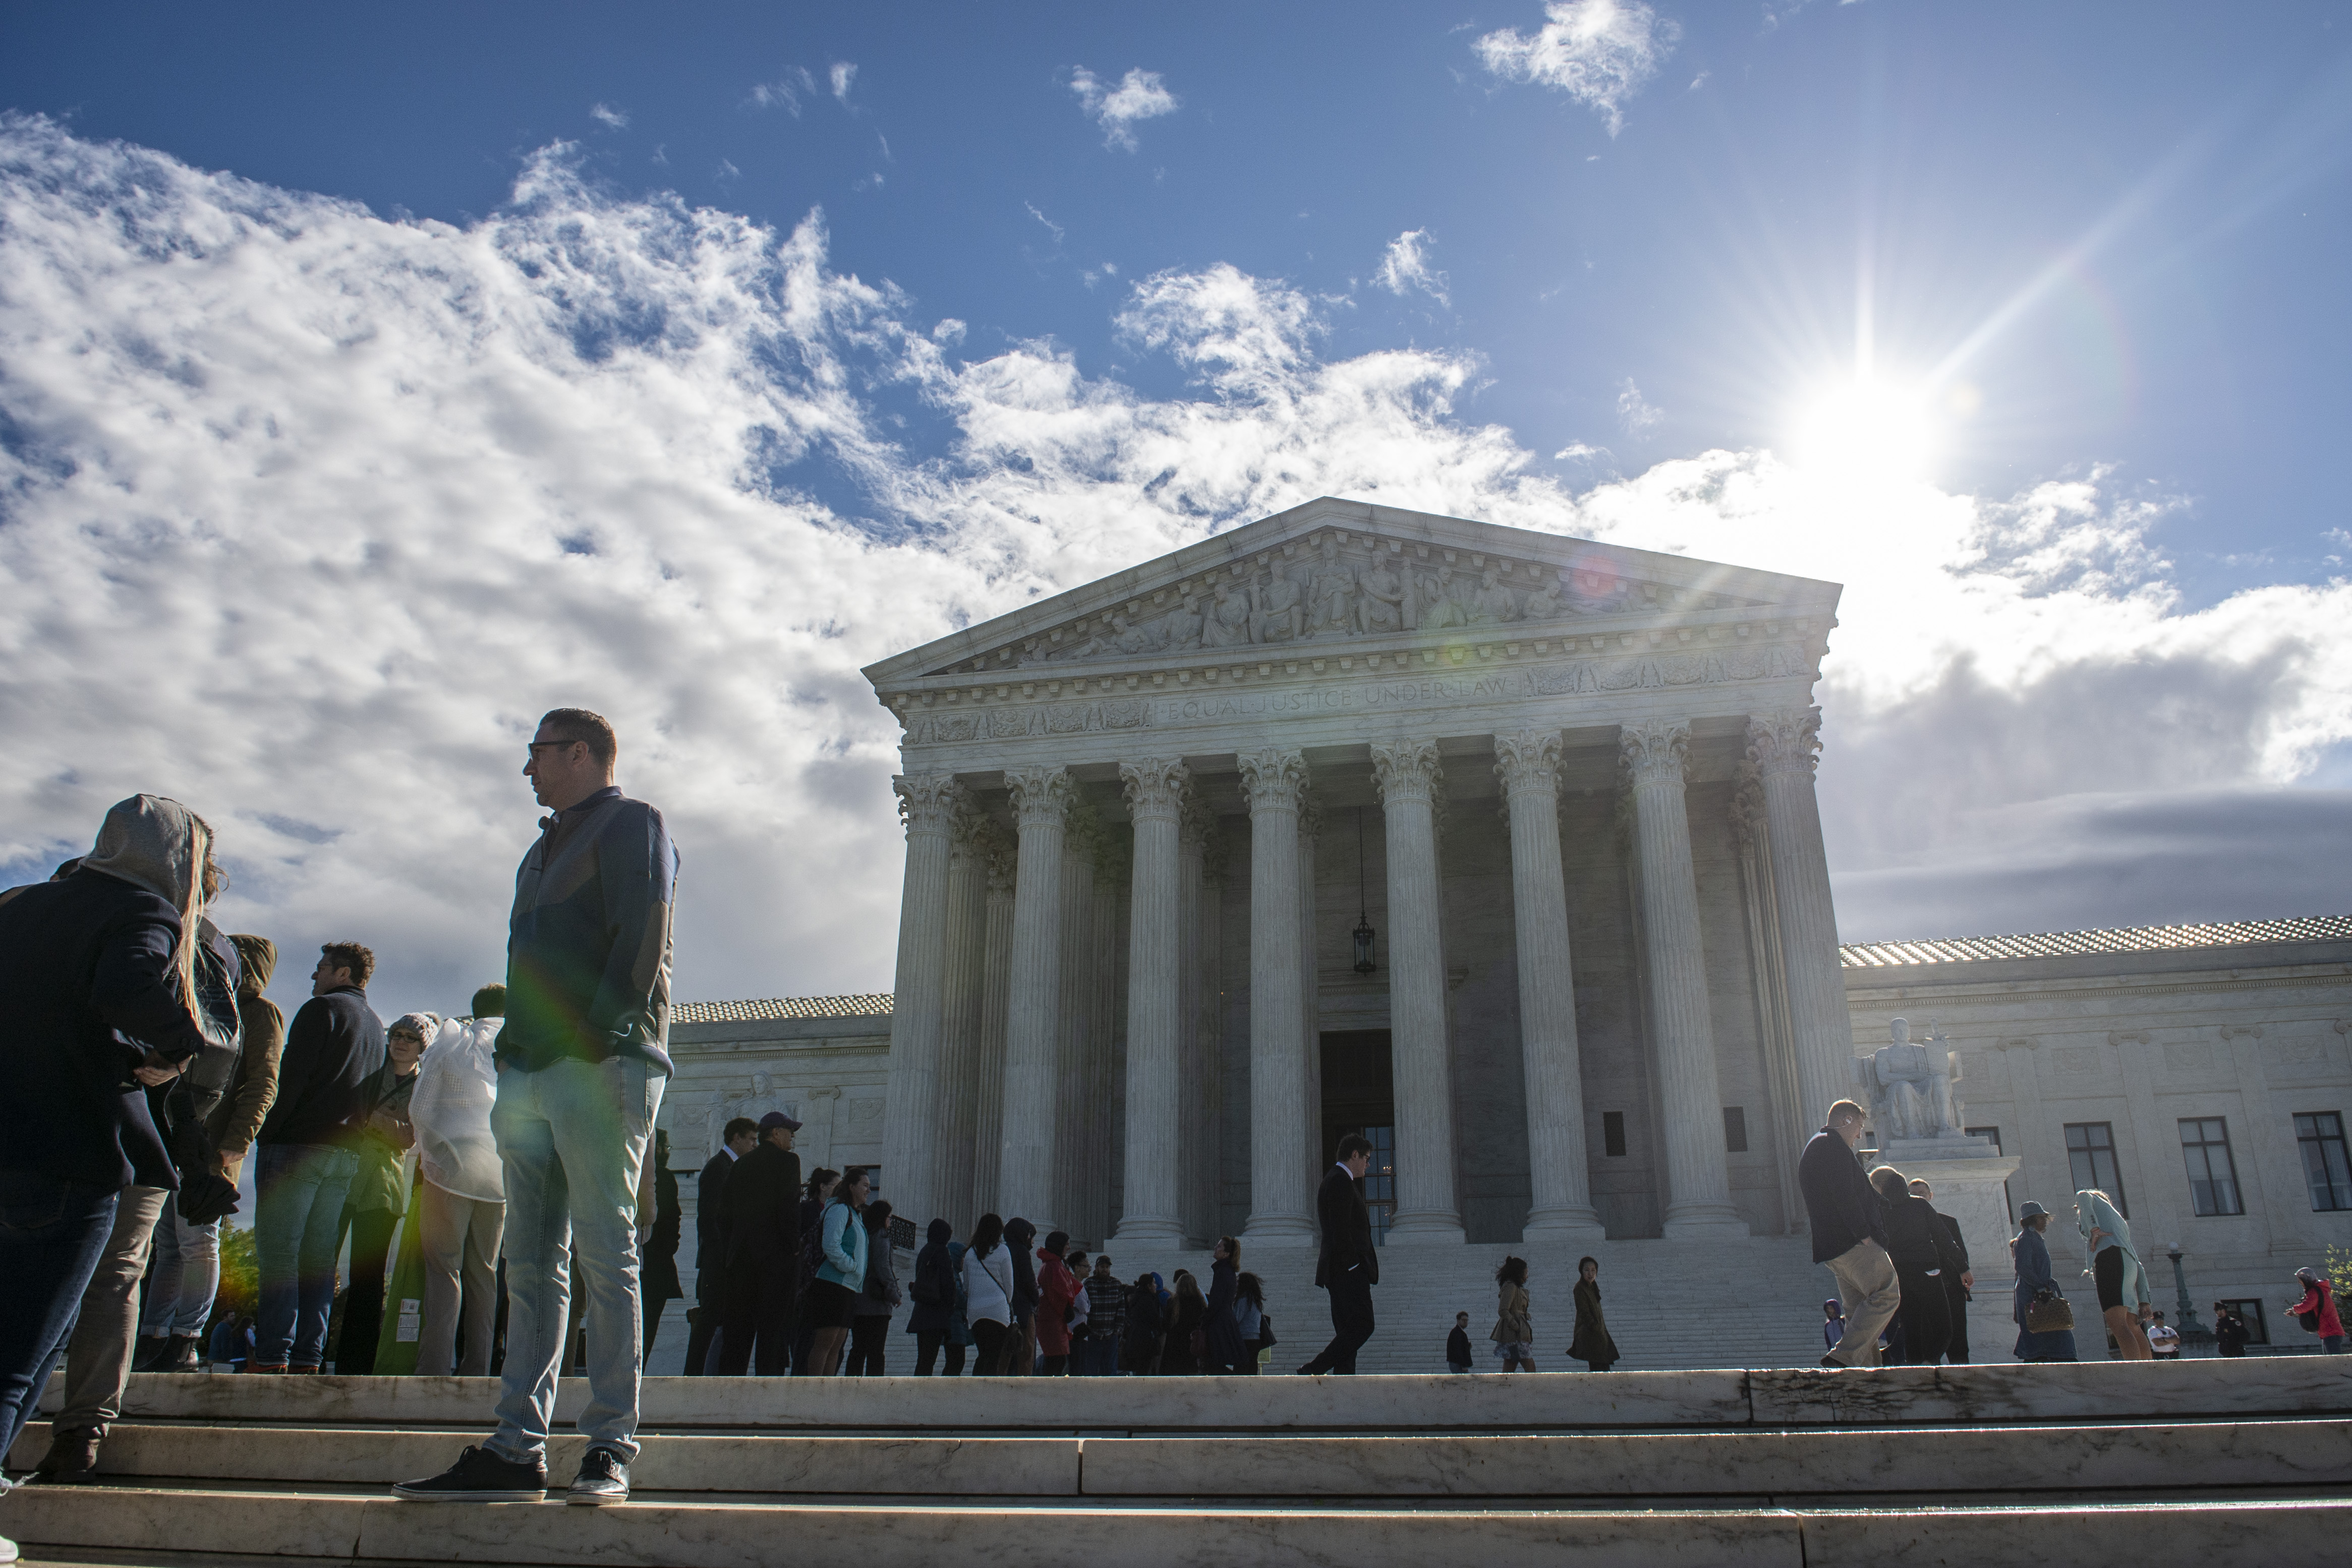 The Supreme Court as seen on April 15, 2019. (Eric Baradat/AFP/Getty Images)